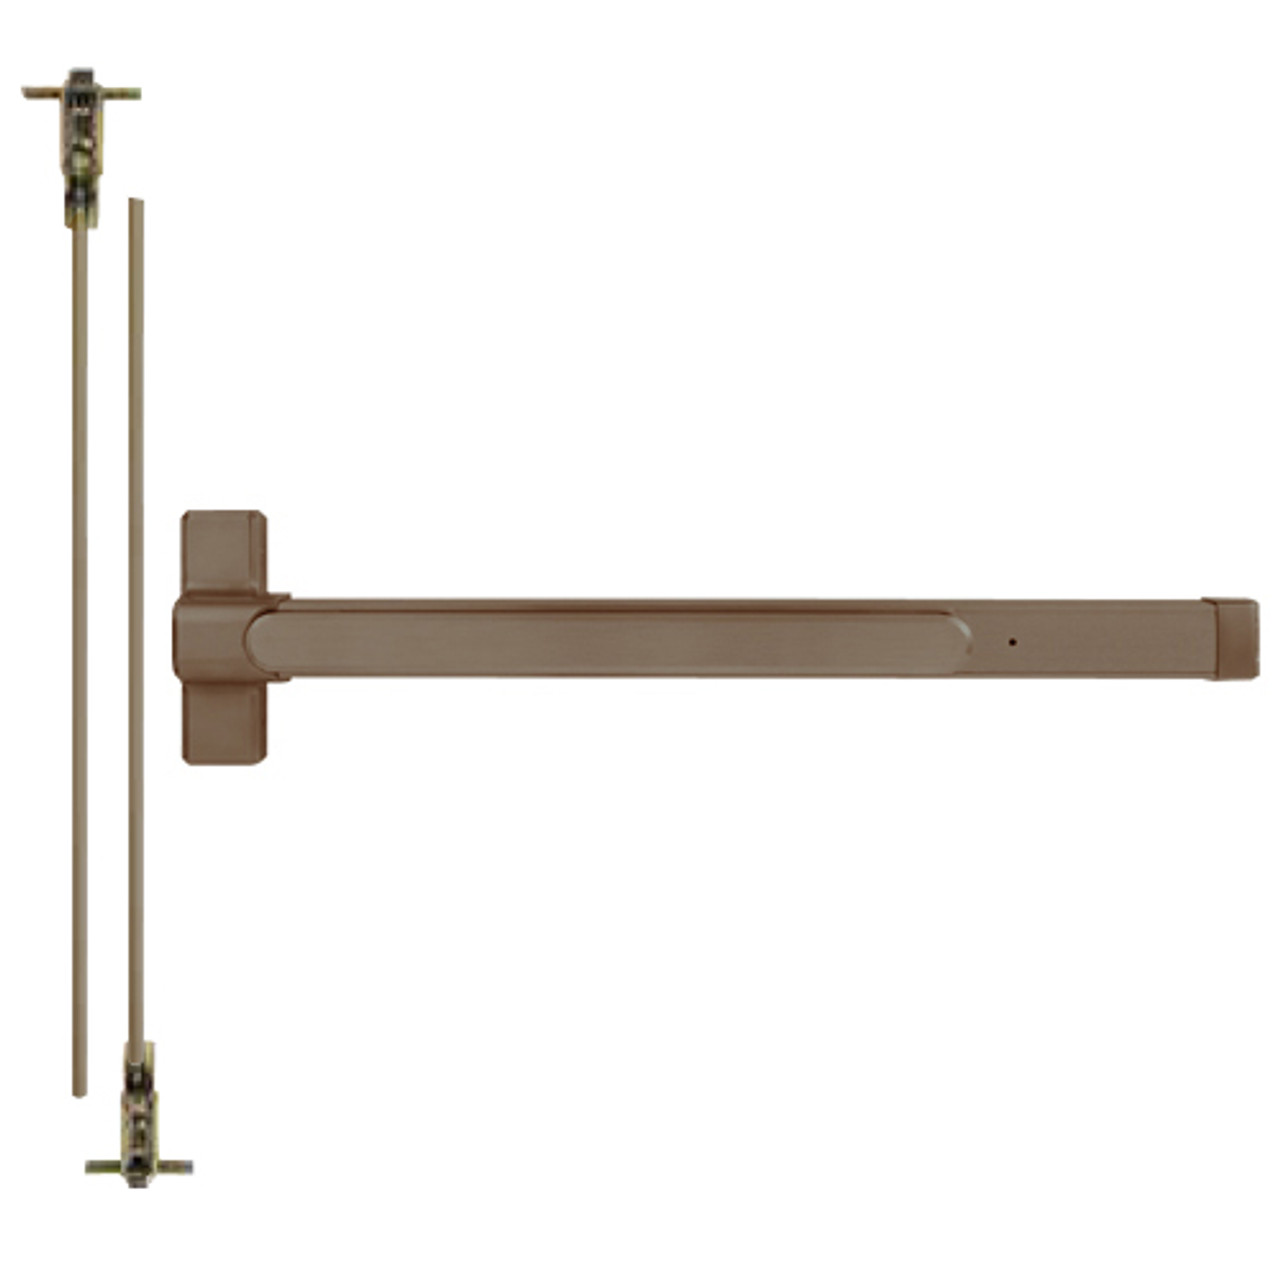 QED125-48-7-313AN-LC Stanley QED100 Series Heavy Duty Concealed Vertical Rod Cylinder Dog Exit Device in Anodized Duranodic Bronze Finish